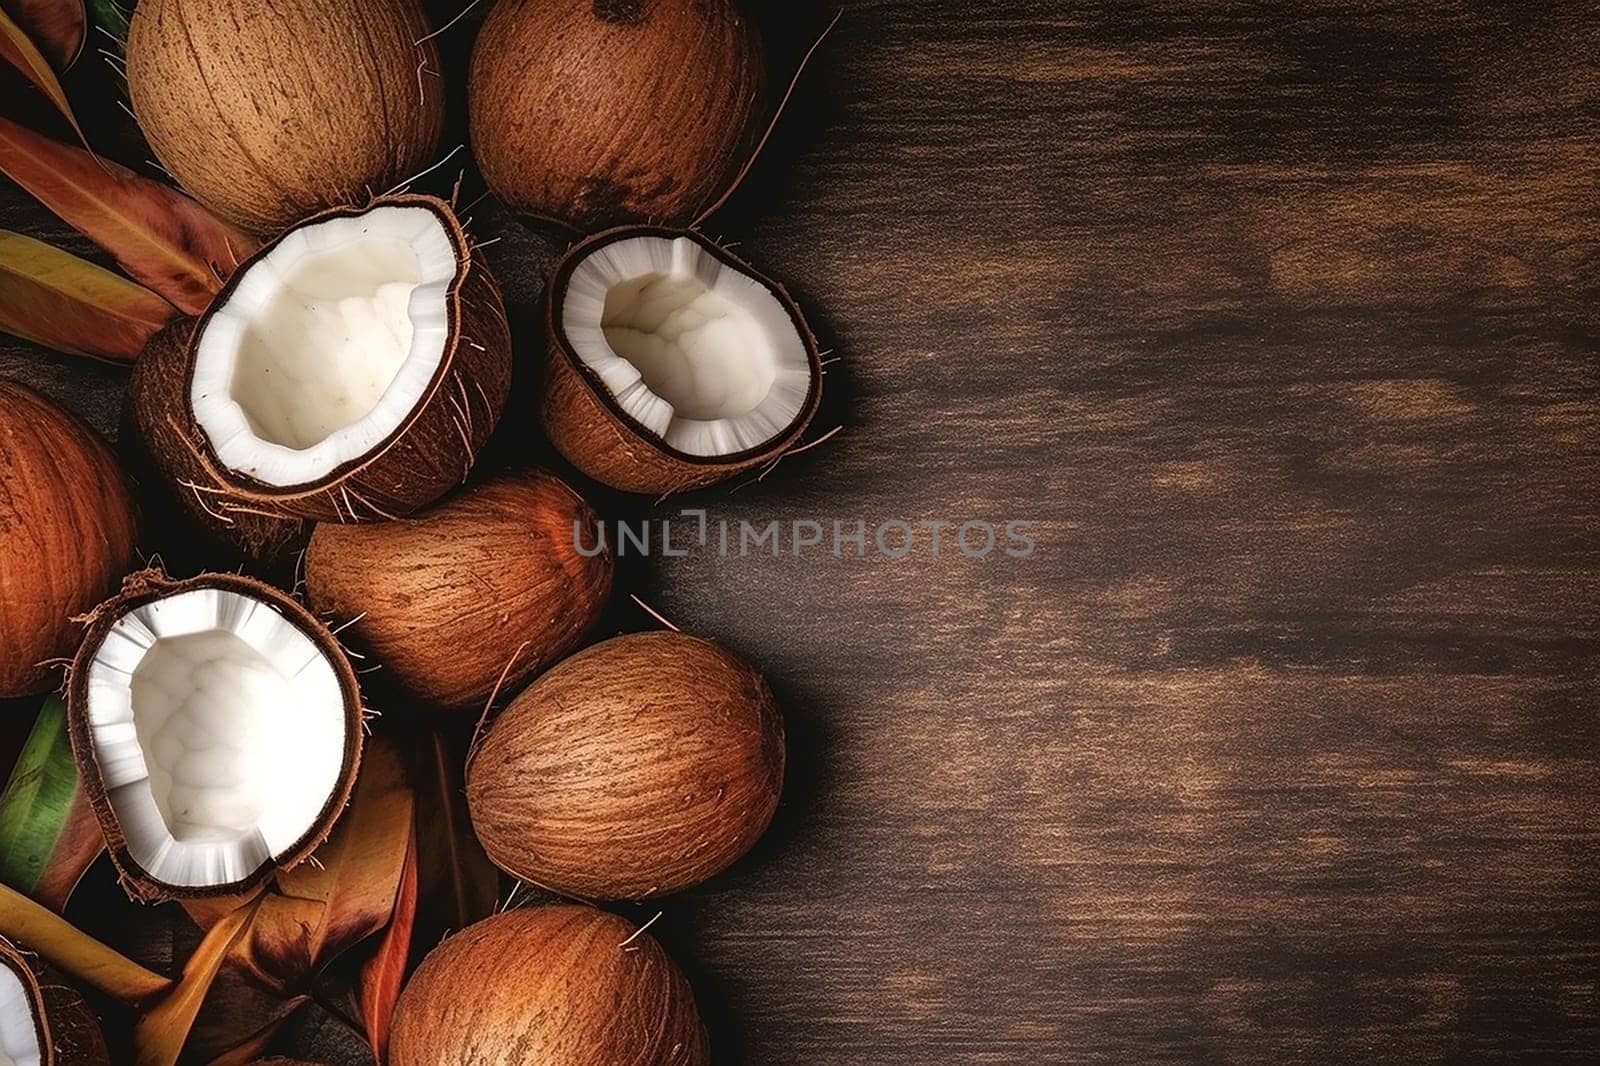 Fresh coconuts split open on wooden surface with tropical leaves.